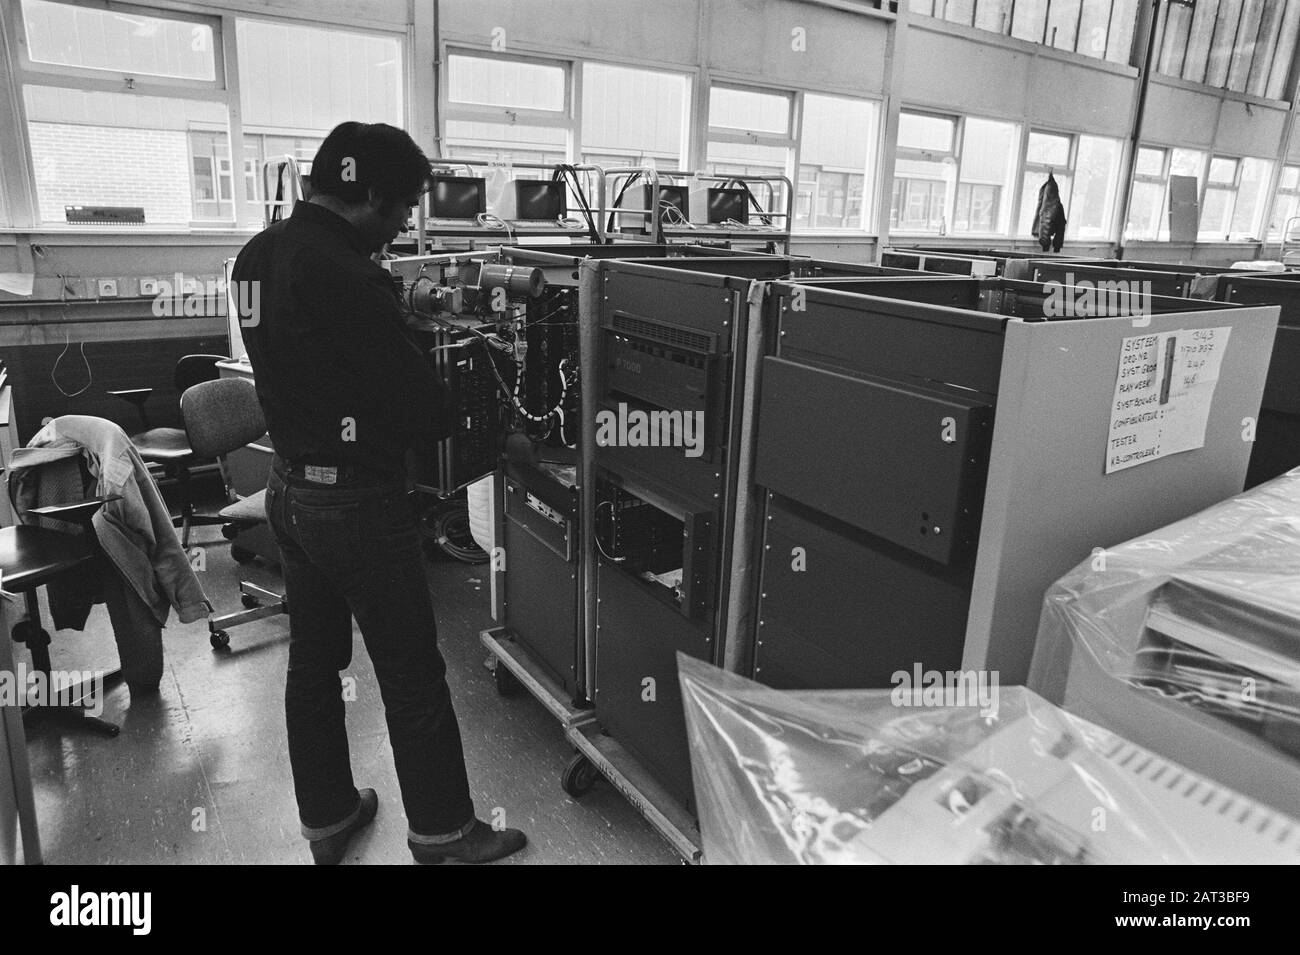 Philips Data Systems in The Hague with support from Unions by personnel occupied in connection with impending closure  The staff of the company manufacturing computer equipment works simply by Date: 27 October 1981 Location: The Hague, Zuid-Holland Keywords: companies, computers, staff members Institution name: Philips Data Stock Photo